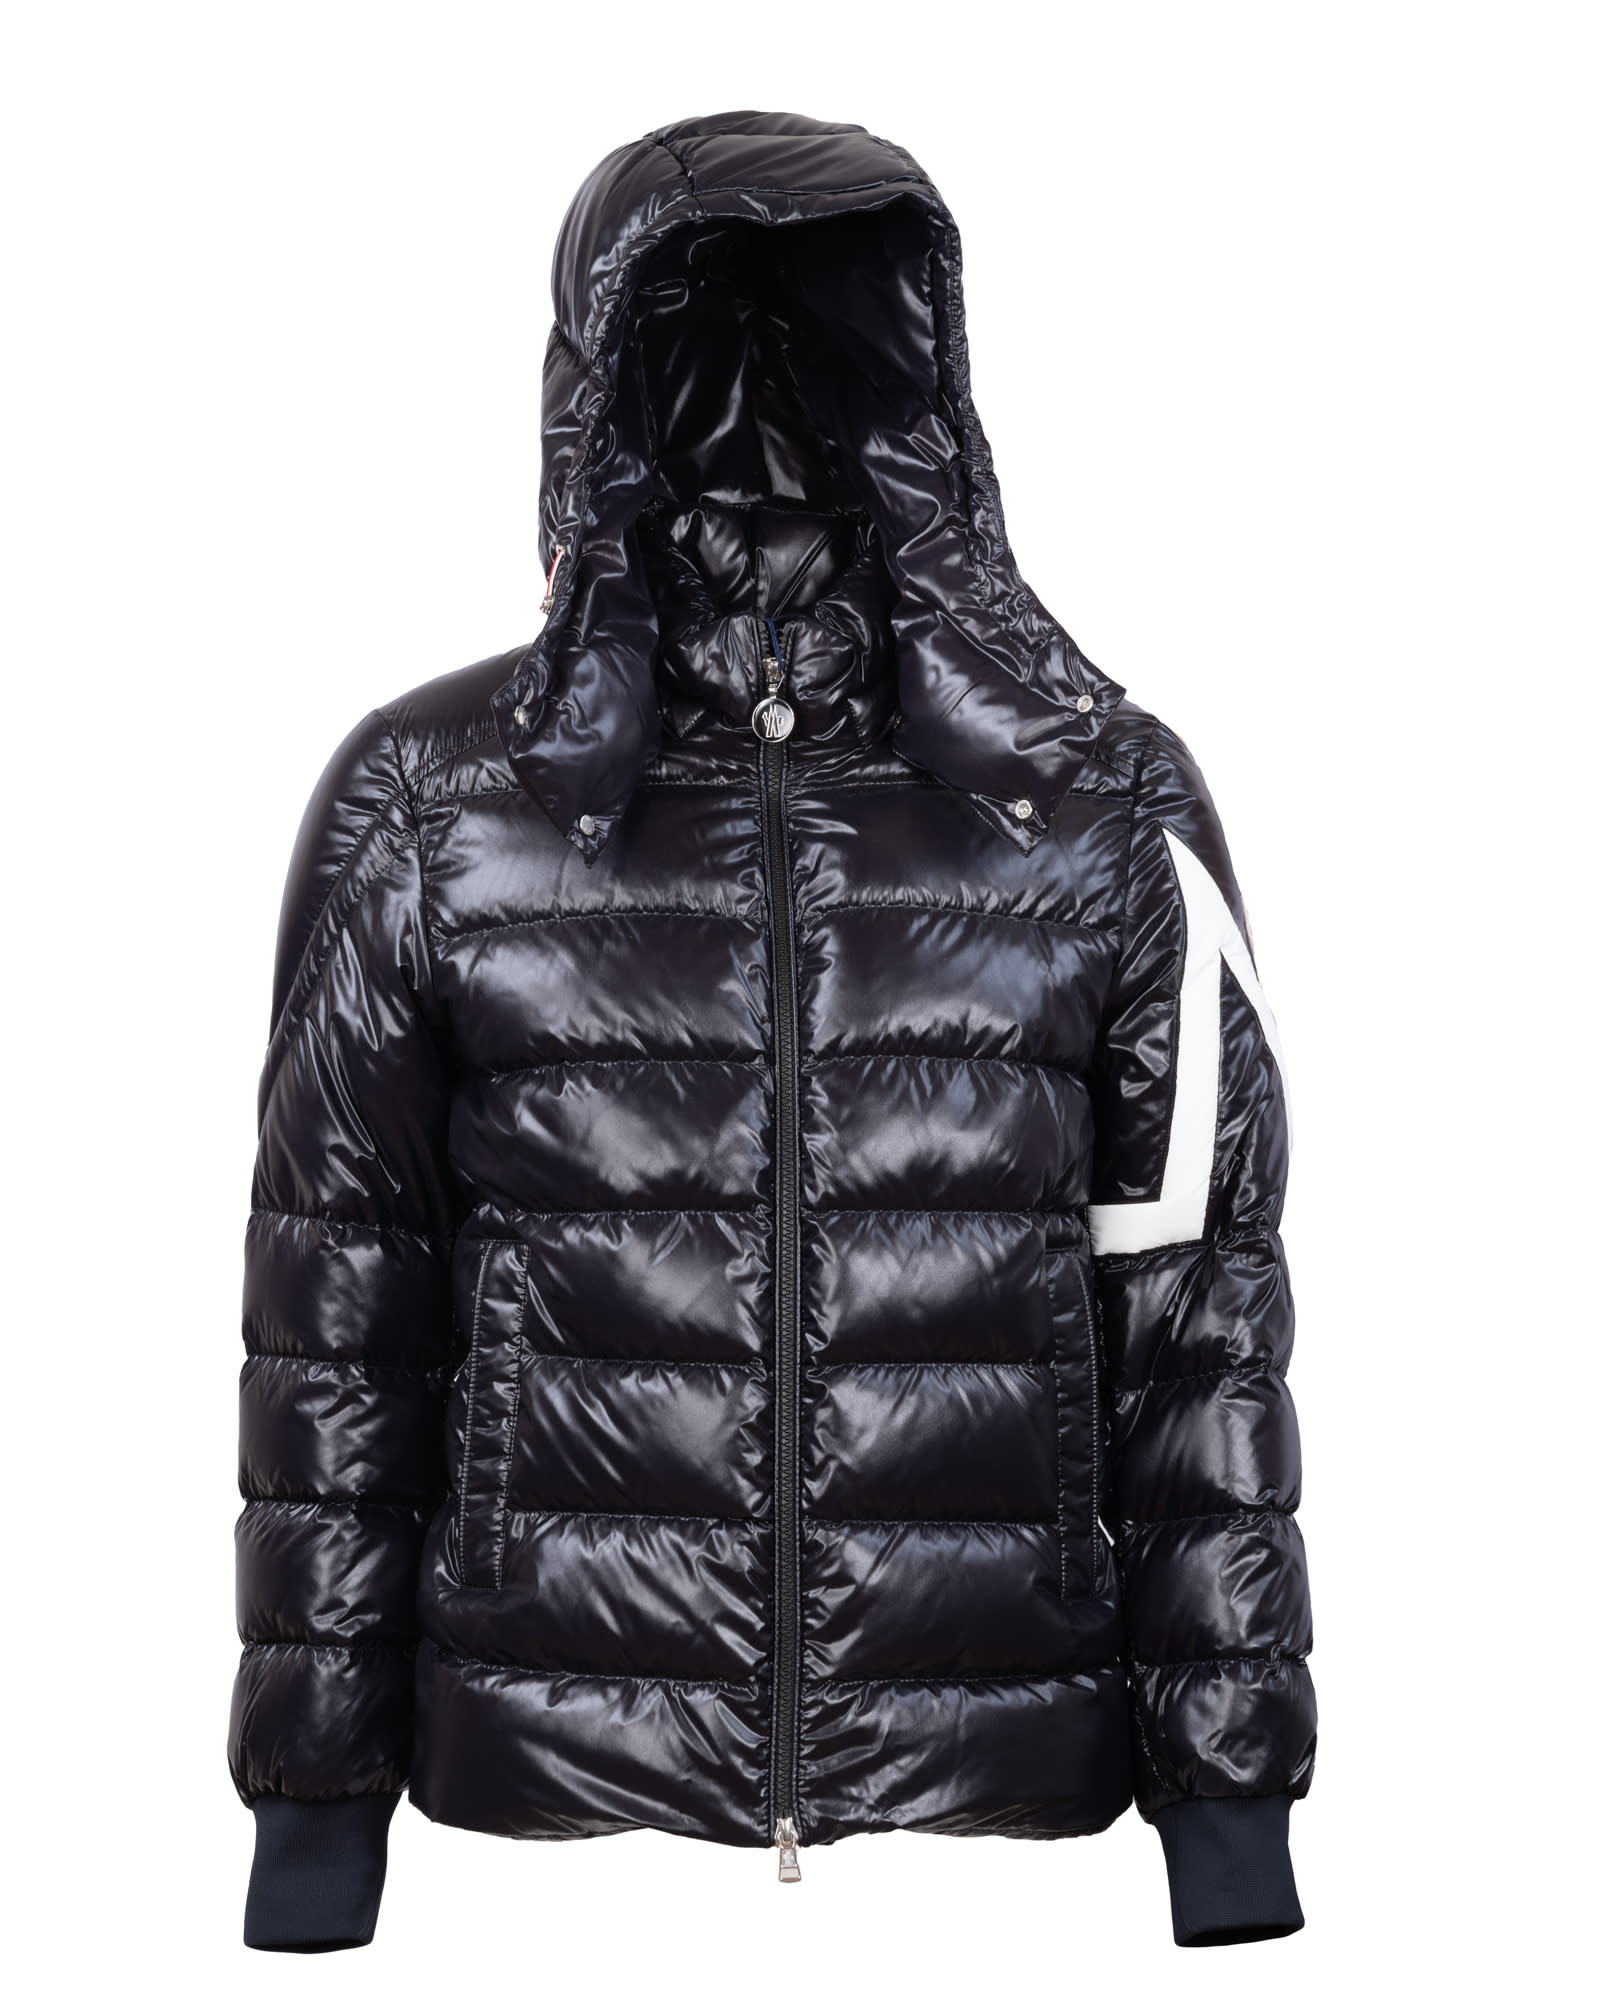 Moncler Corydale short down jacket crafted